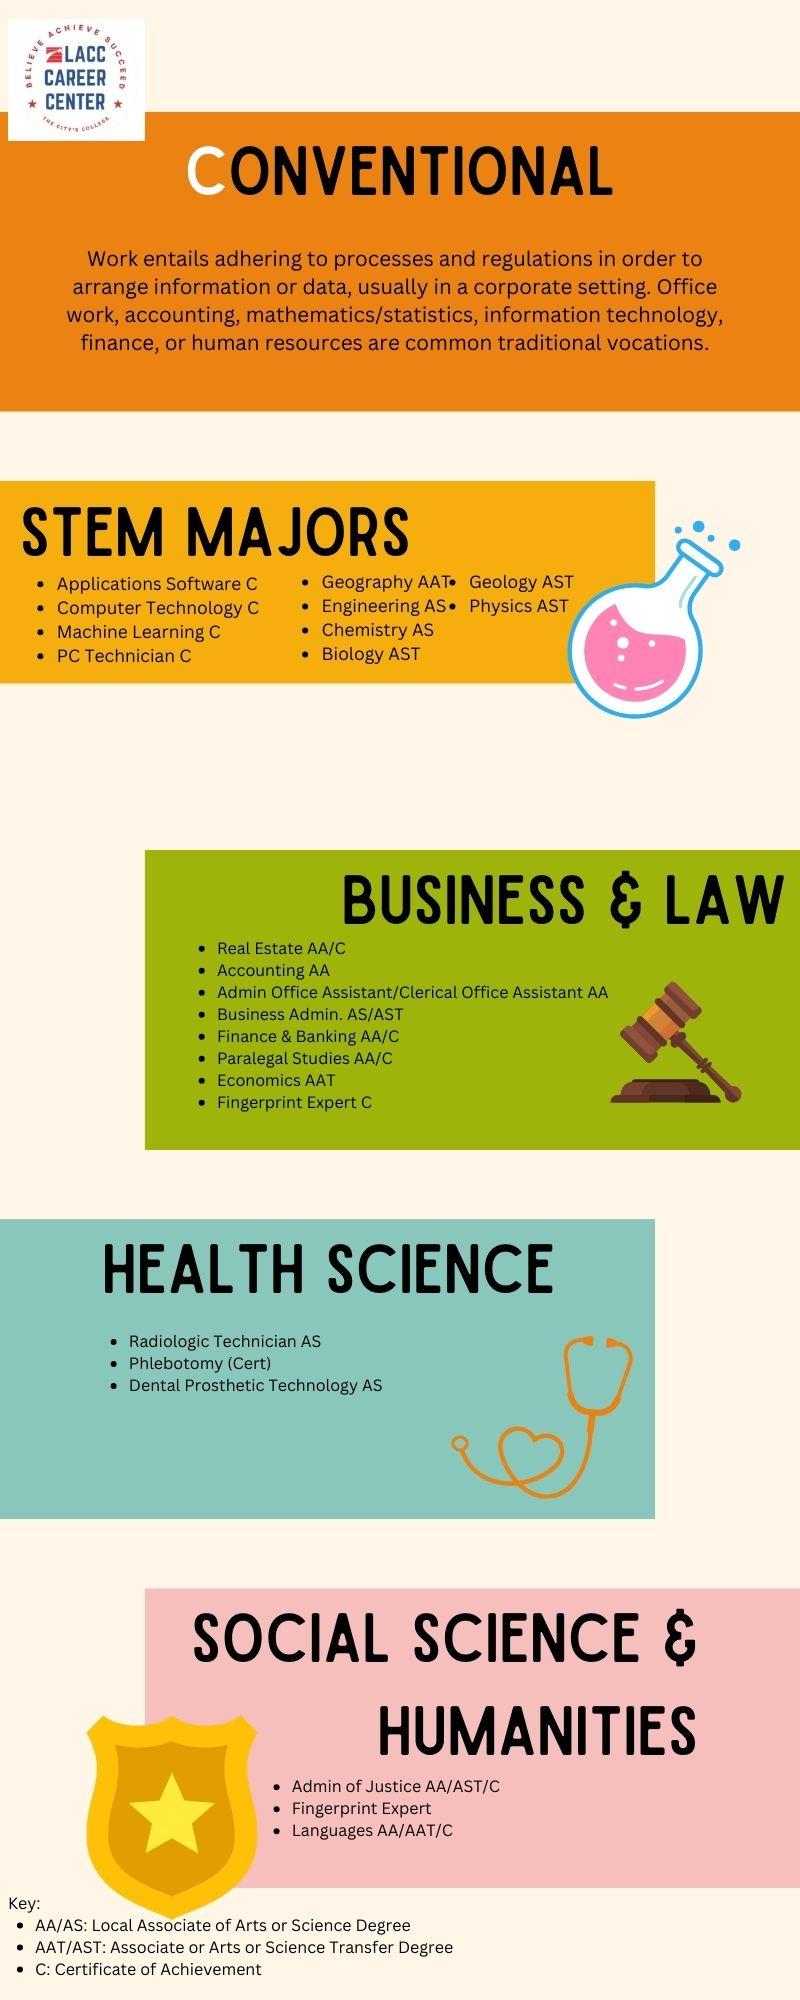 Infographic Listing LACC Majors with Conventional Themes